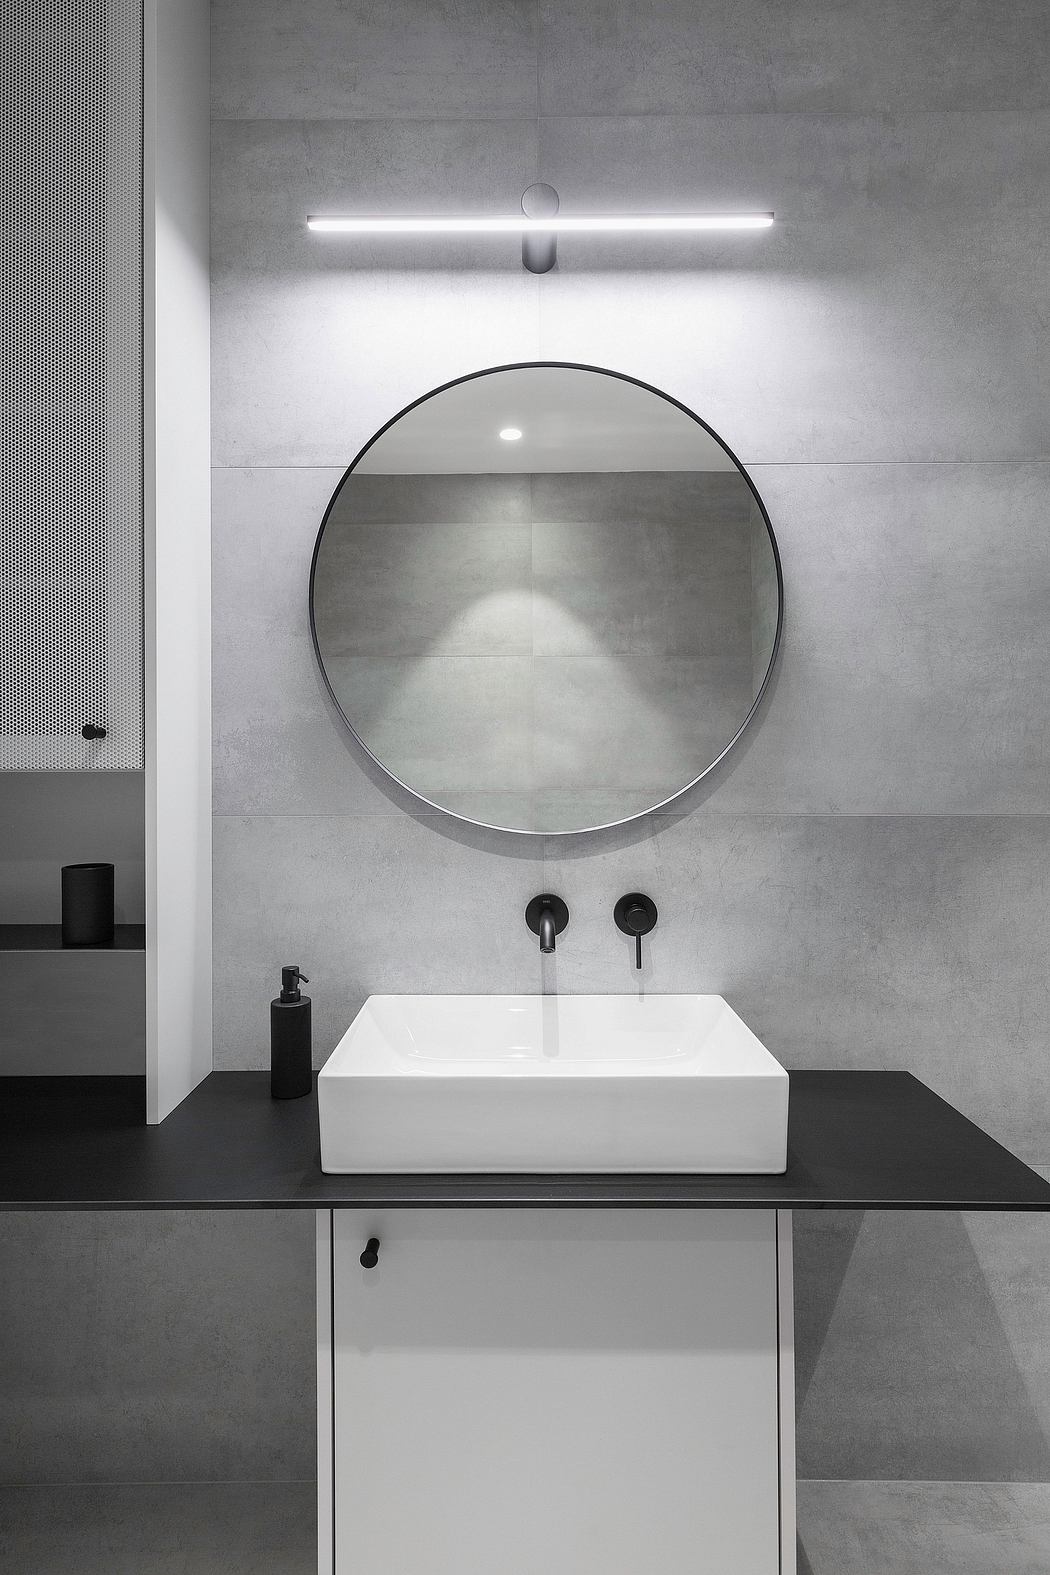 A minimalist bathroom design featuring a large circular mirror, a white sink, and concrete walls.